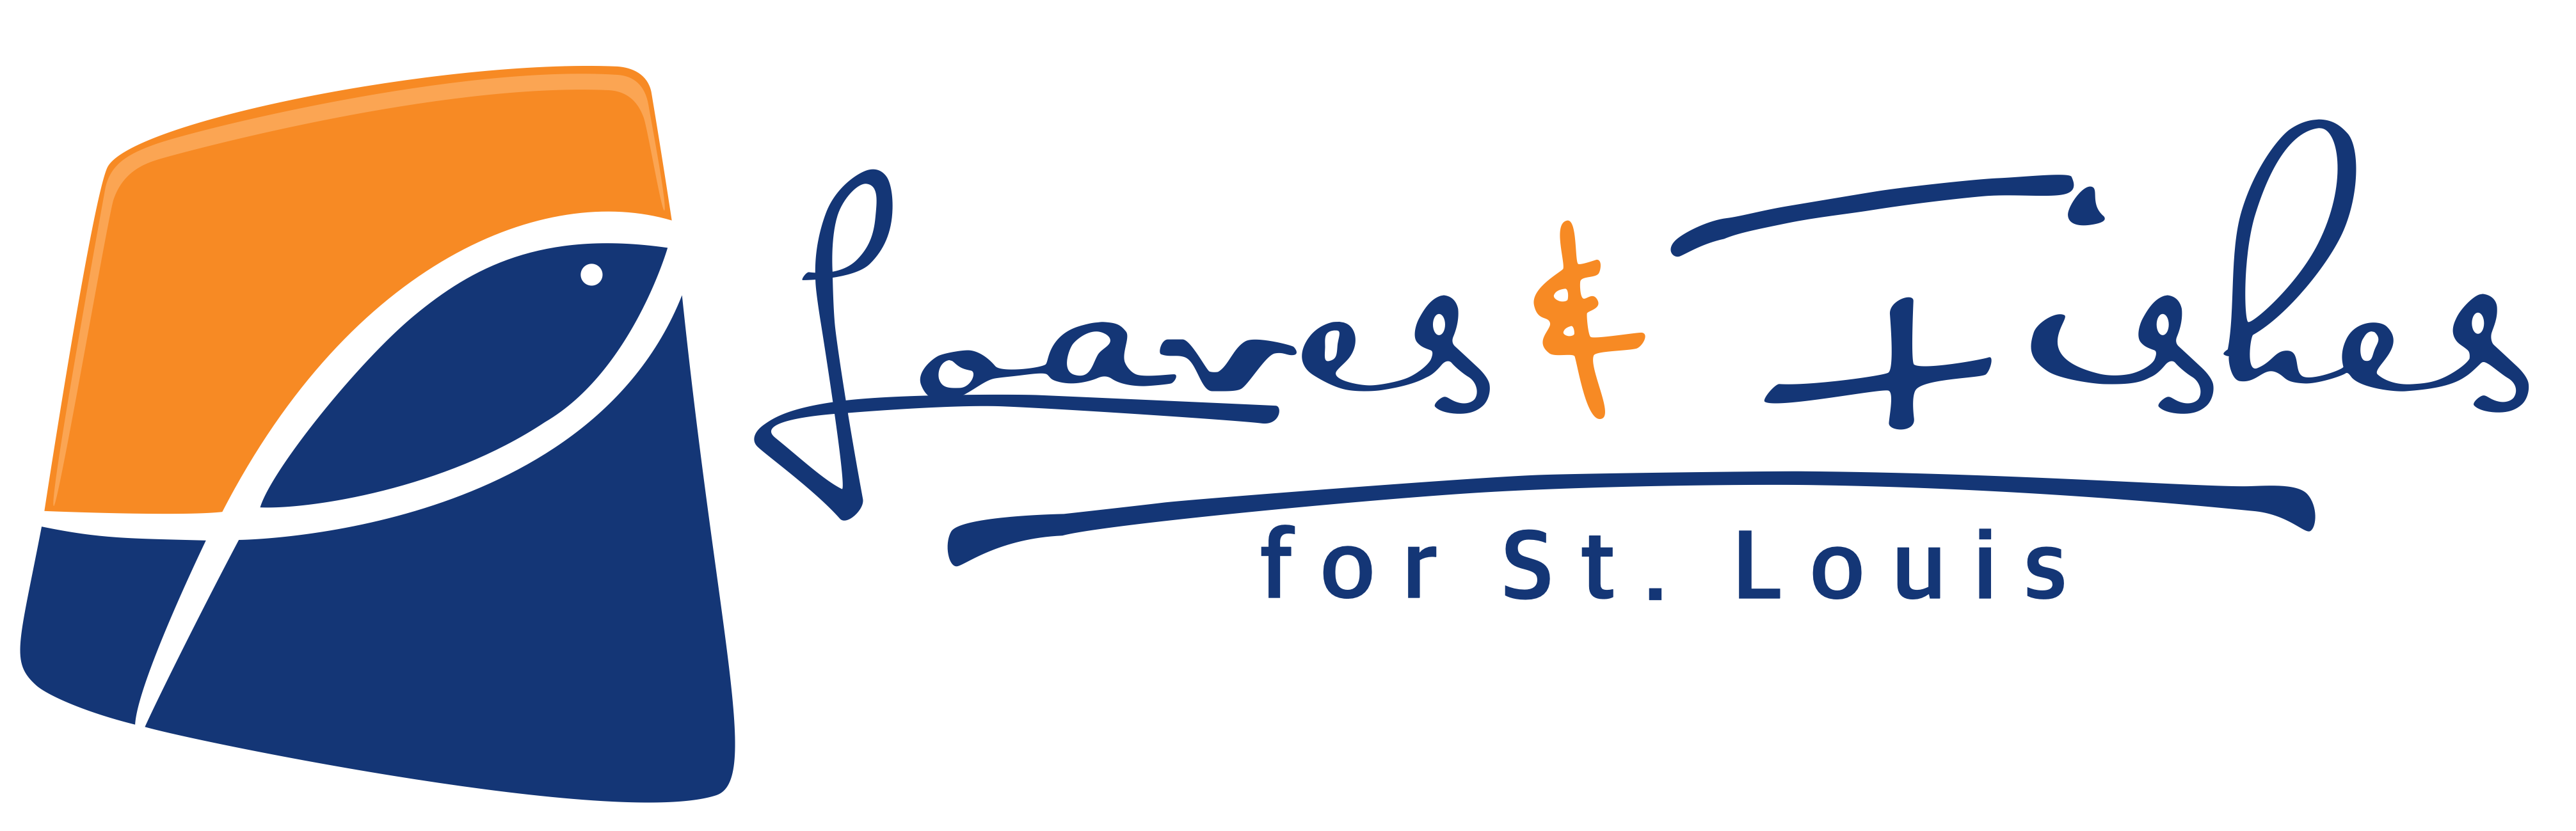 Loaves and Fishes of St. Louis